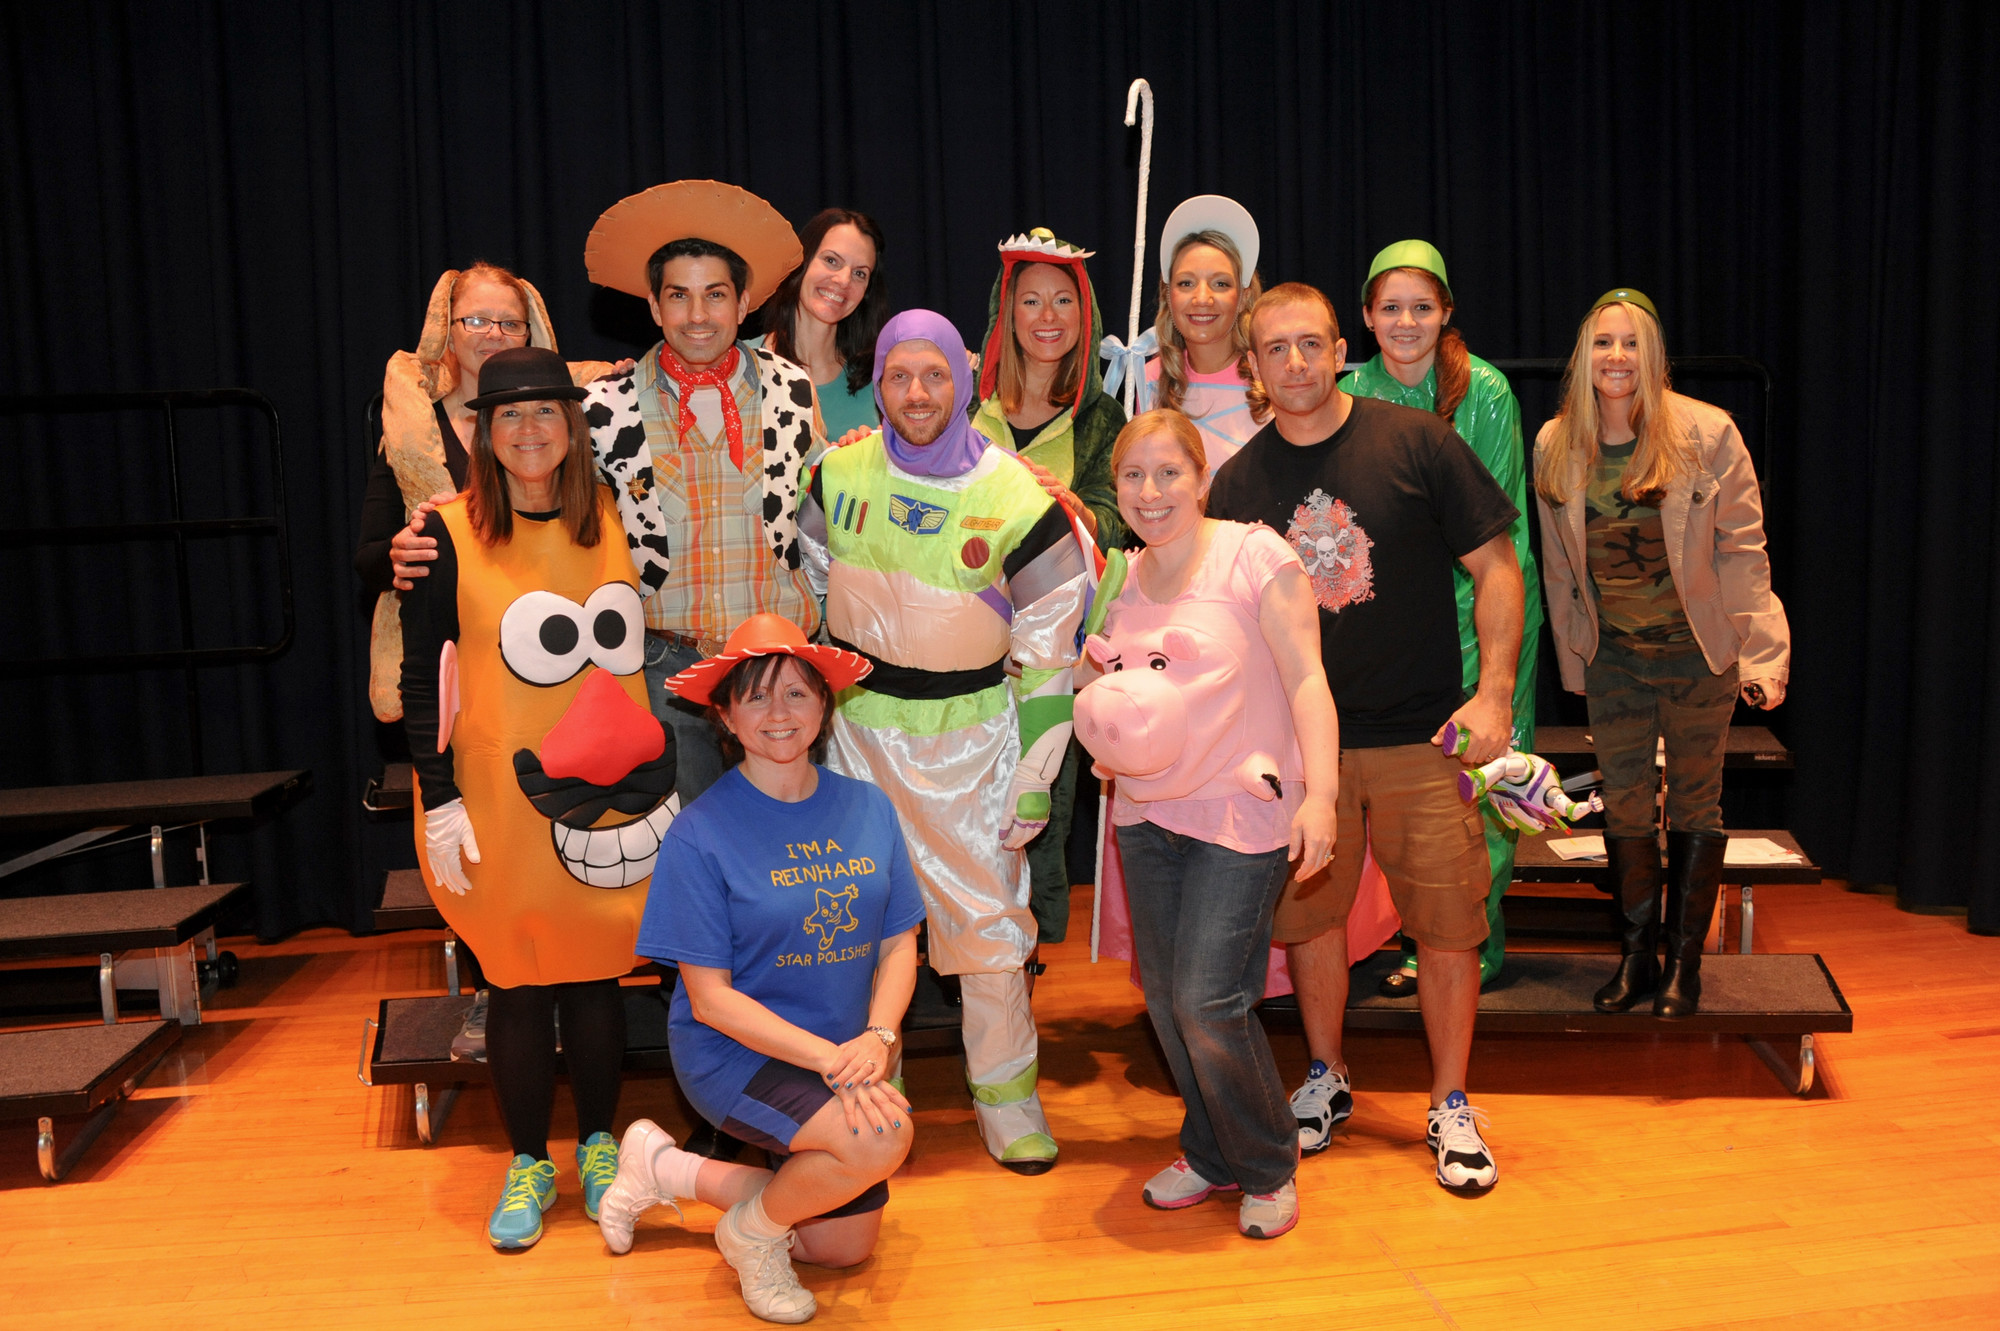 Dressed as characters from Disney’s “Toy Story,” staff members performed a short play illustrating the rules of the road and school.